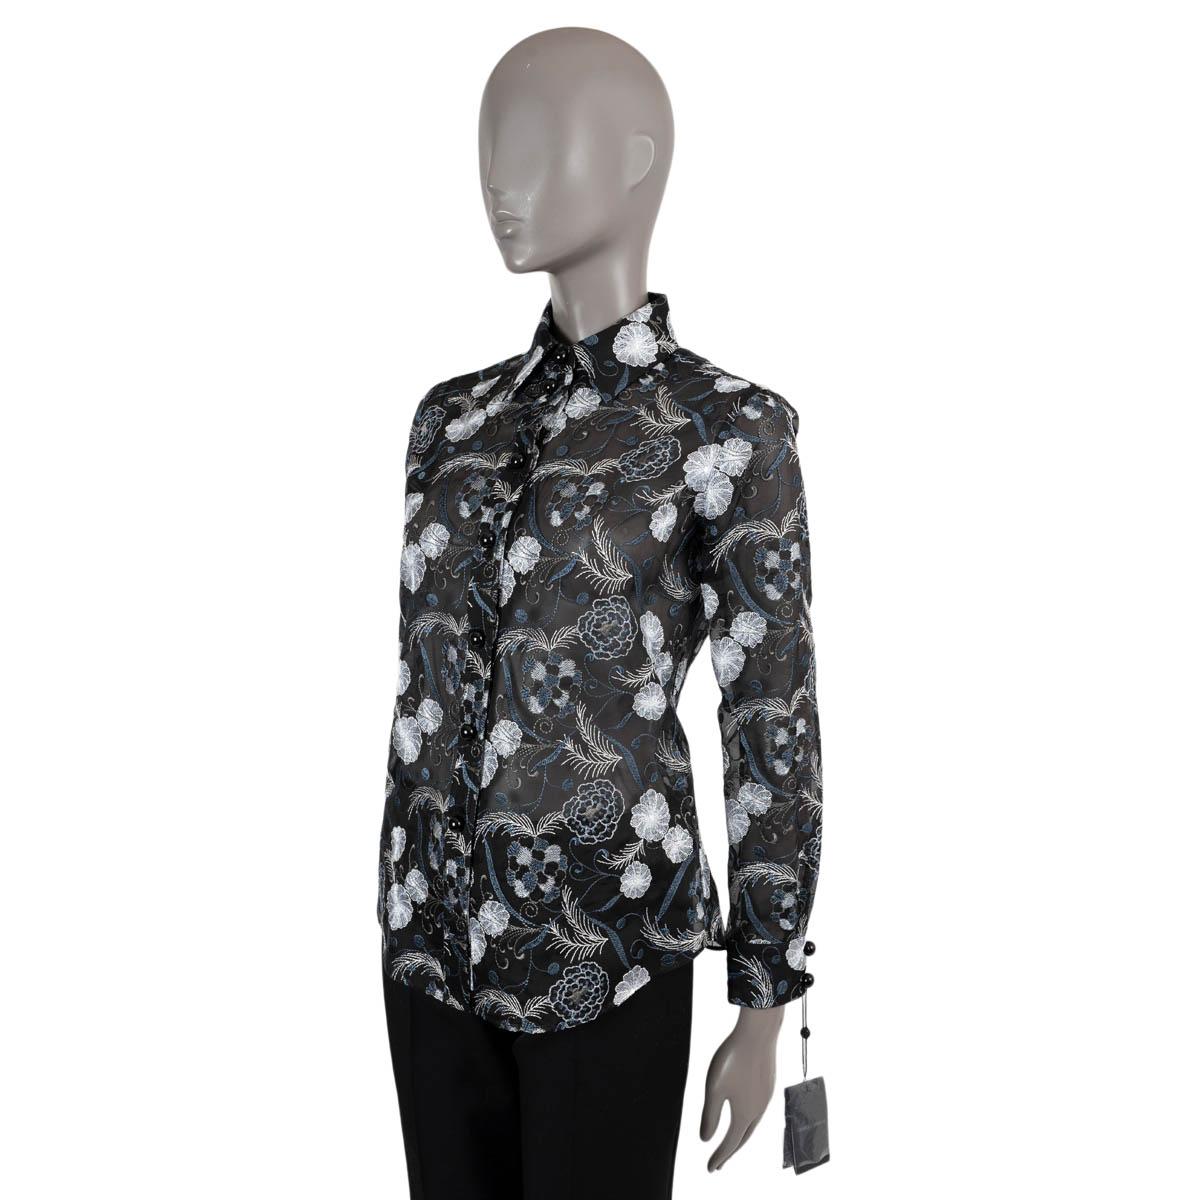 100% authentic Giorgio Armani sheer blouse in black viscose-silk-polyester blend. Features floral embroideries in white and blue, slim-fit, bracelet sleeves and point collar. Brand new with tag.

Measurements
Tag Size	40
Size	S
Shoulder Width	38cm